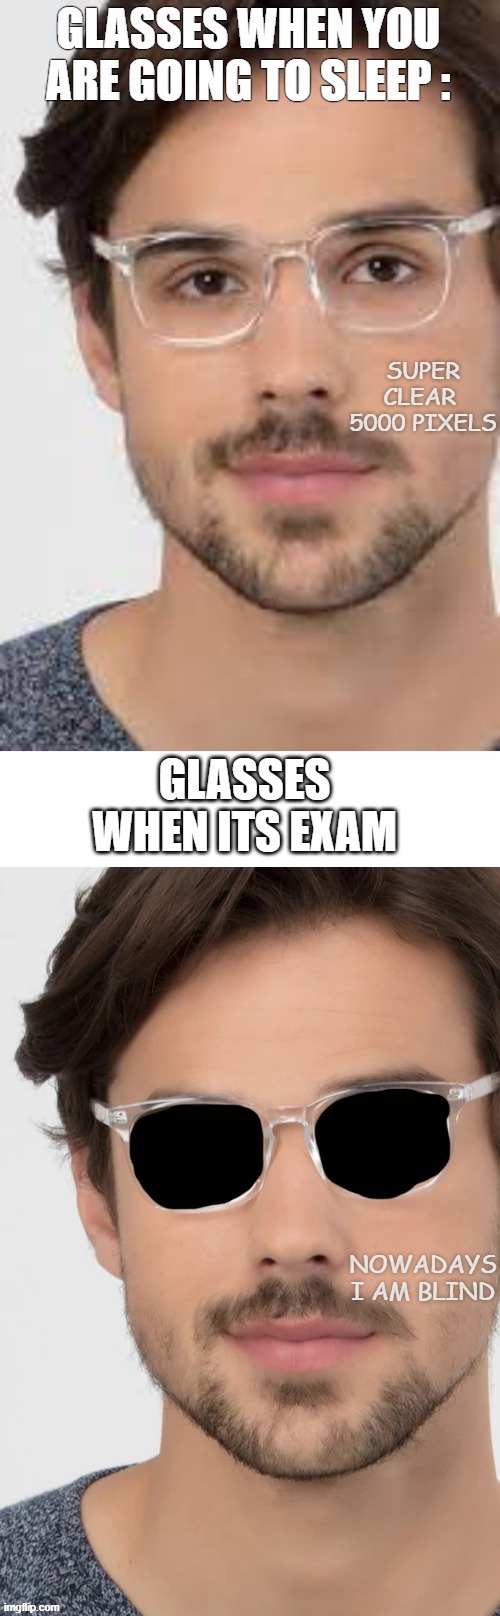 GLASSES OR SPECS | image tagged in funny,memes,life | made w/ Imgflip meme maker